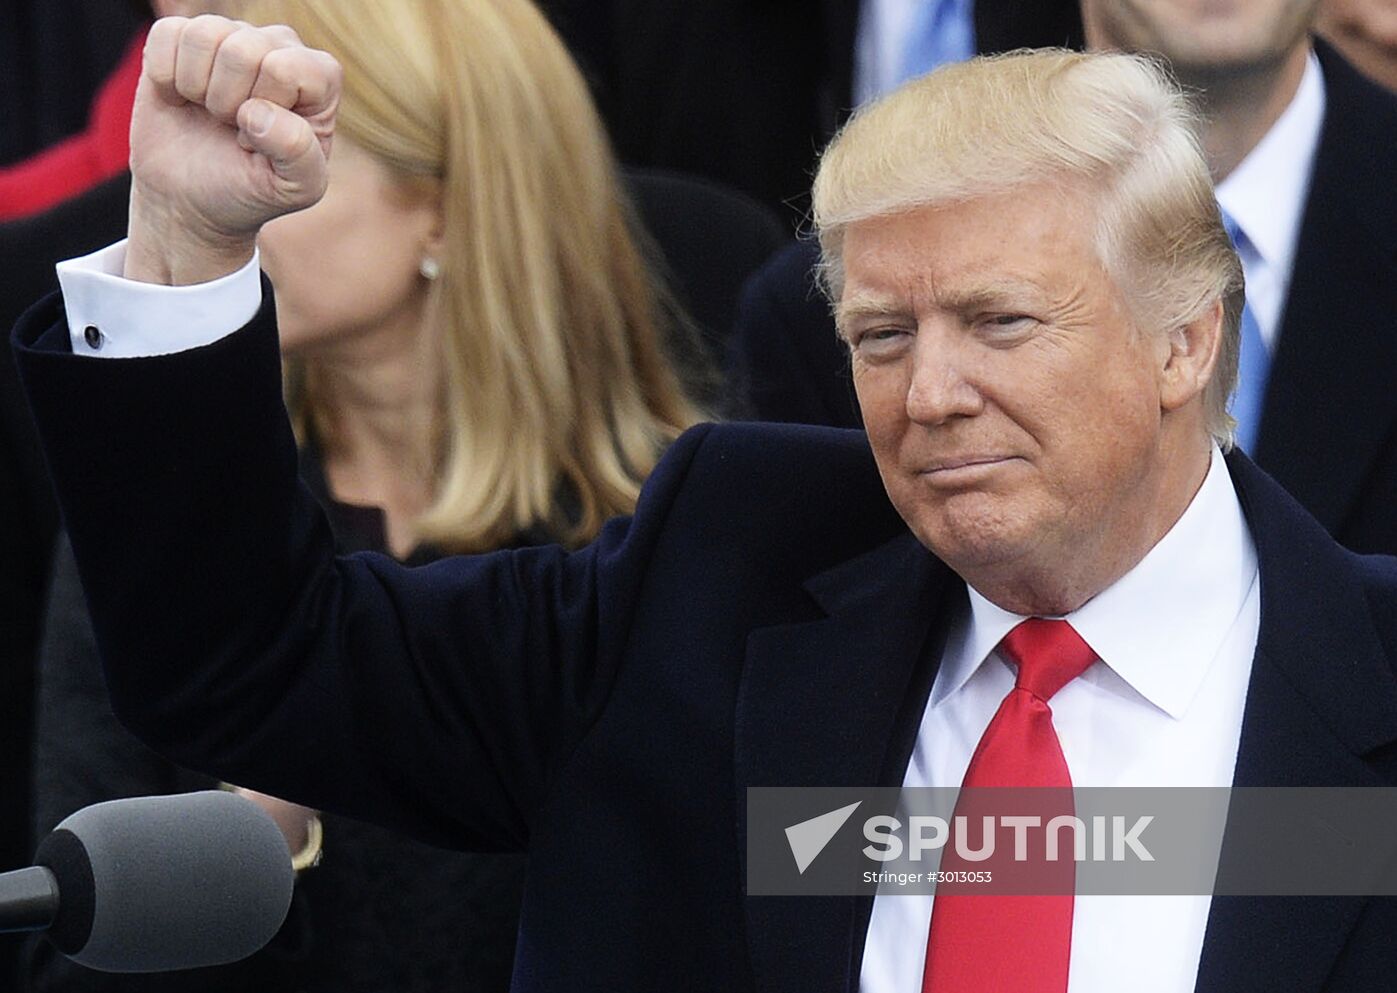 45th US President-elect Donald Trump's Inauguration Day